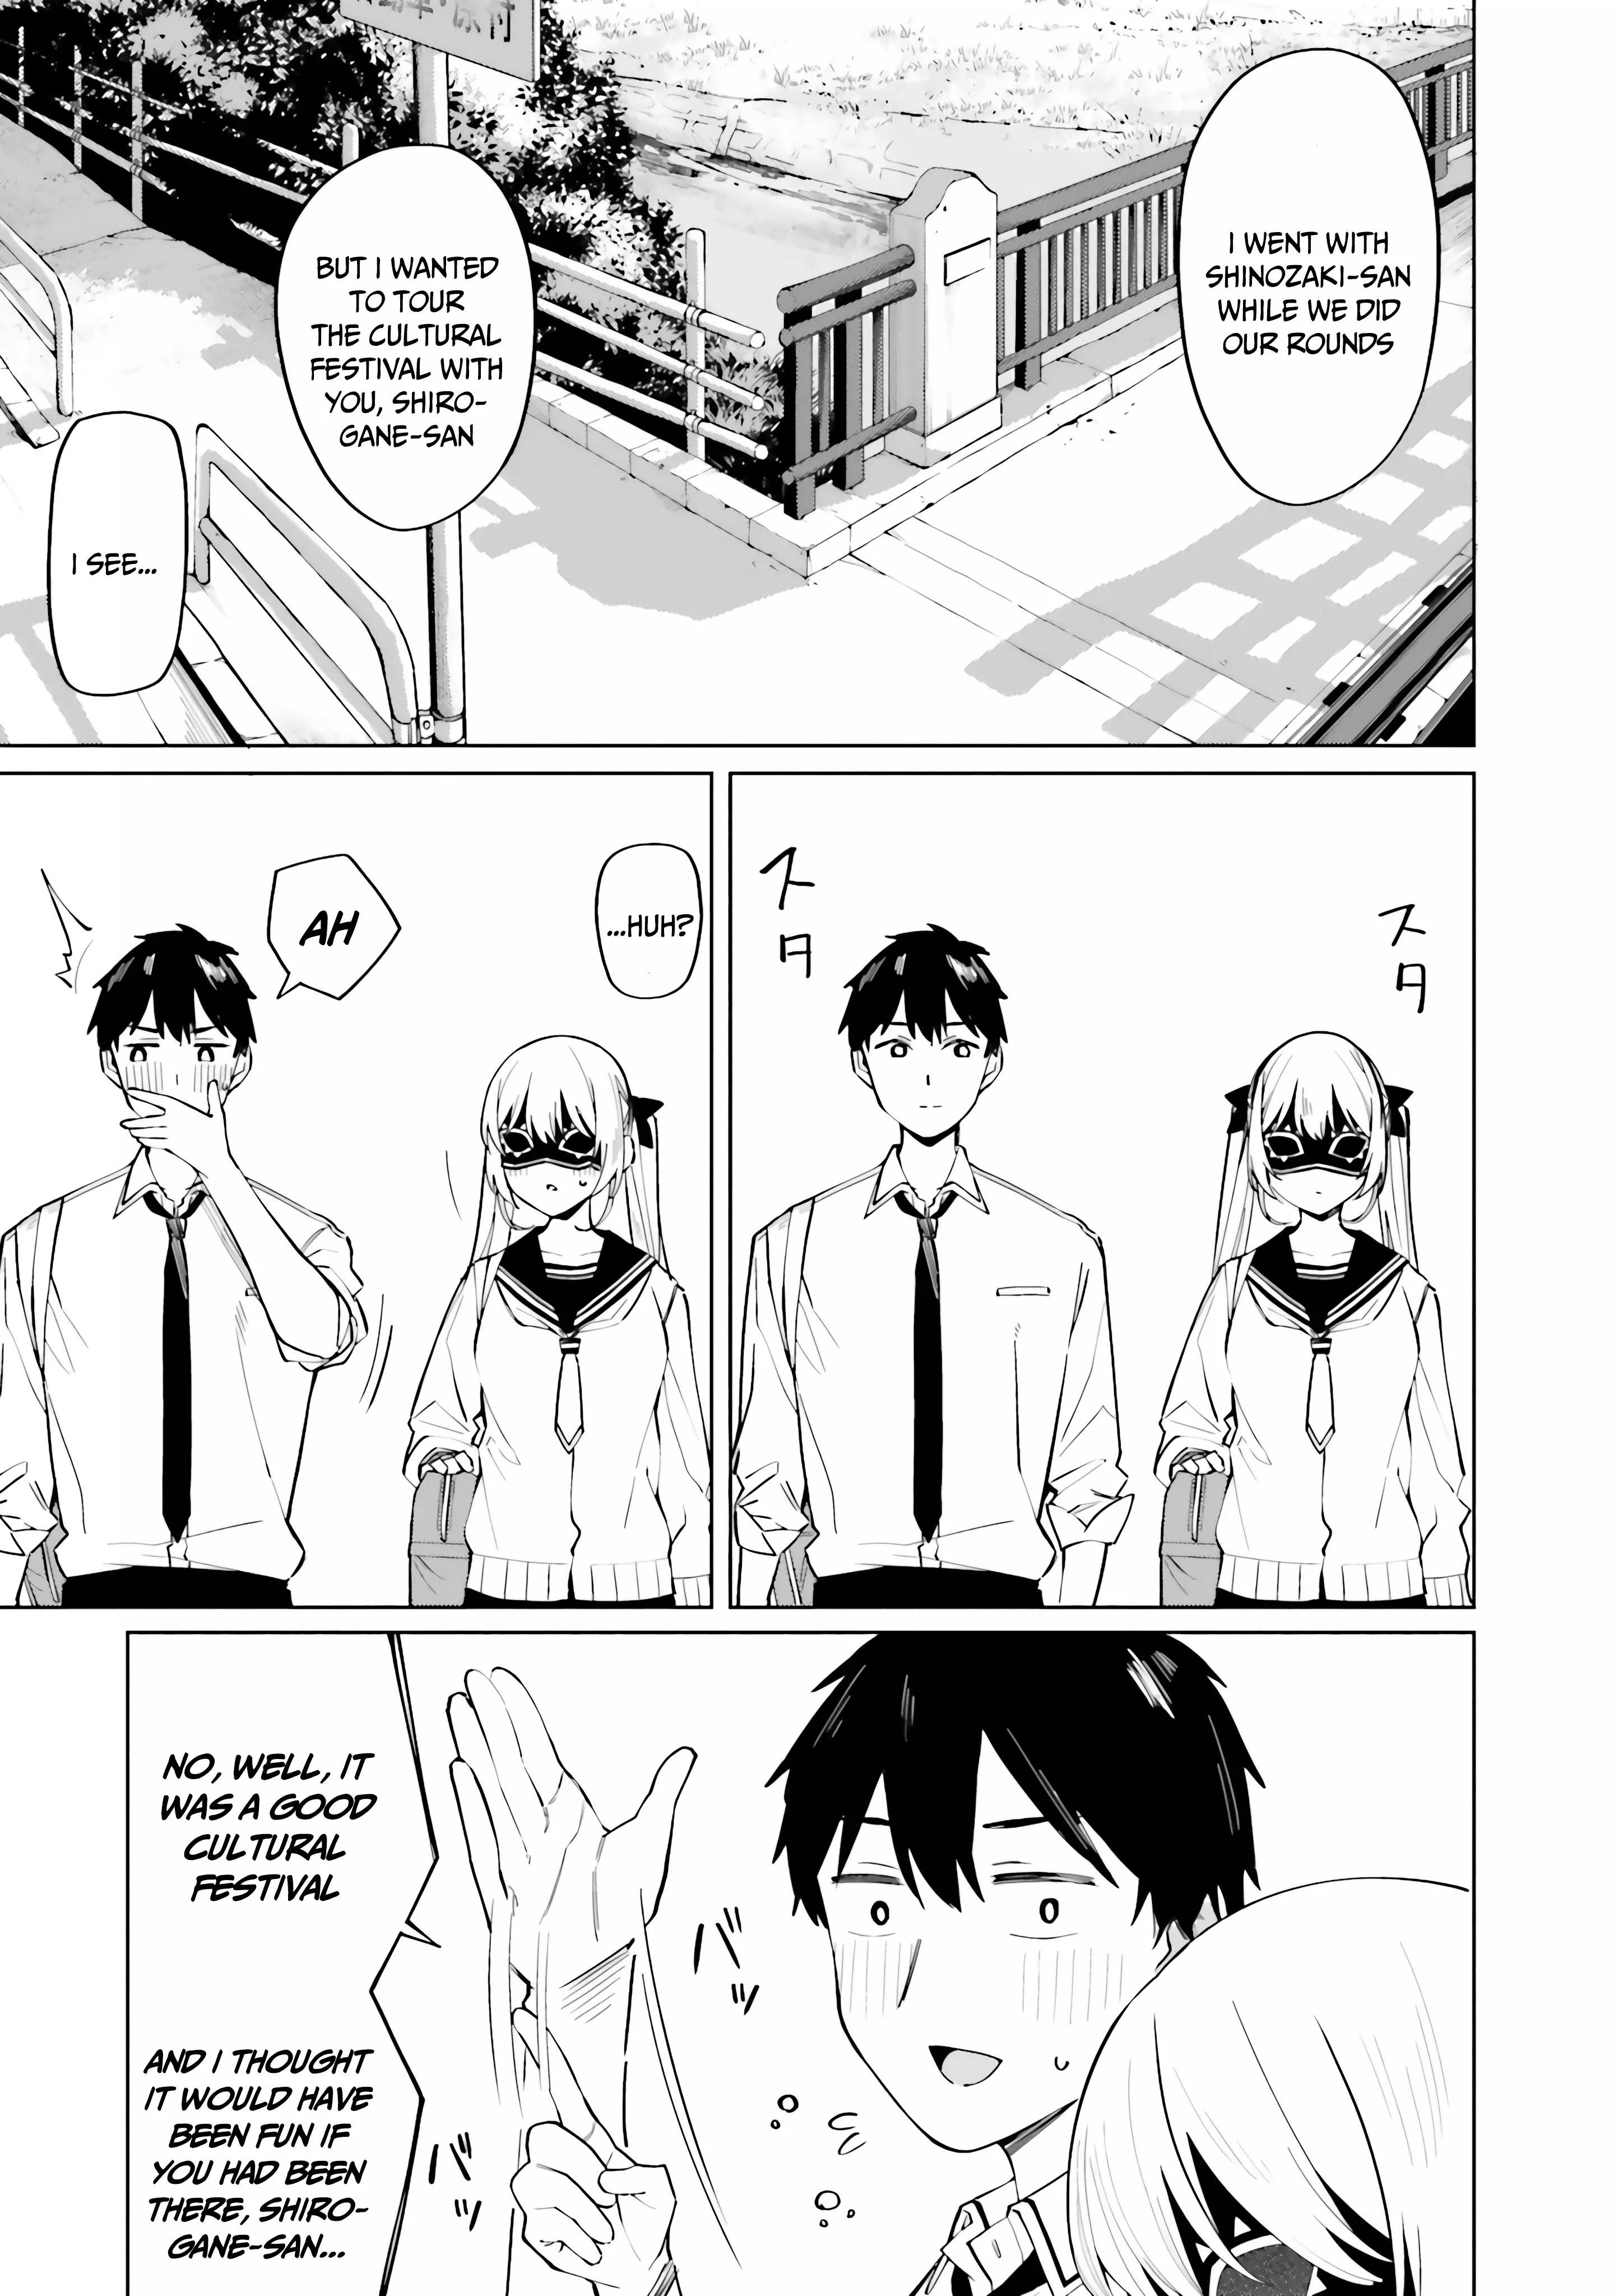 I Don't Understand Shirogane-San's Facial Expression At All - 16 page 8-84d336fb